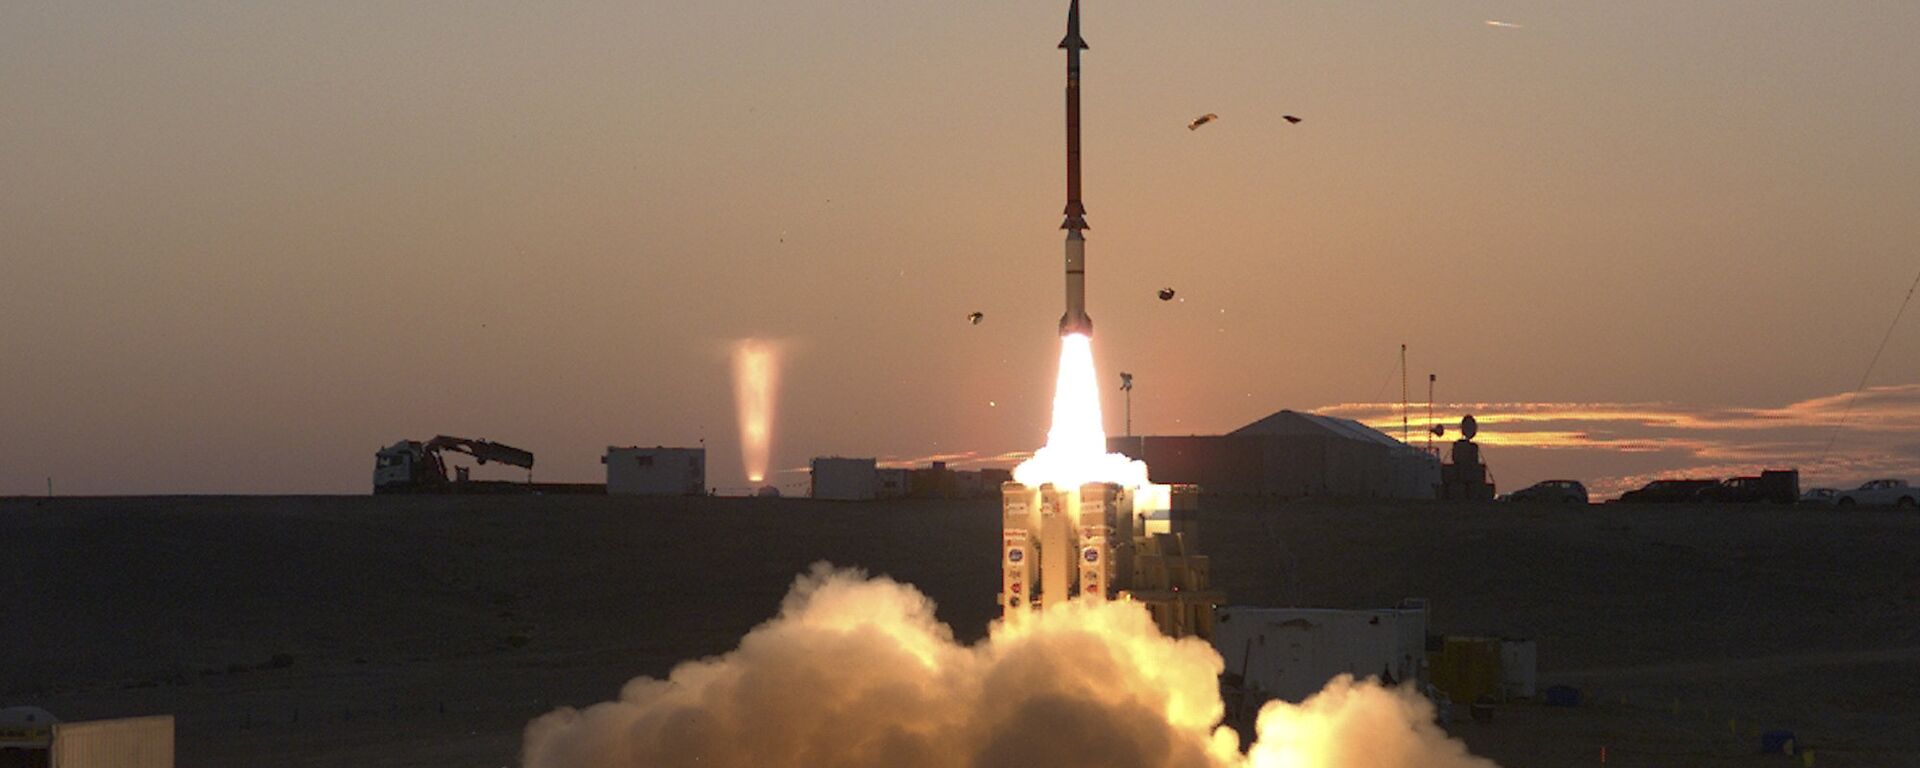 This photograph provided by the Israeli Ministry of Defense on Monday Dec. 21, 2015 shows a launch of David's Sling missile defense system. David's Sling is intended to counter medium-range missiles possessed by enemies throughout the region, most notably the Lebanese Shiite militant group Hezbollah.  - Sputnik International, 1920, 12.04.2020